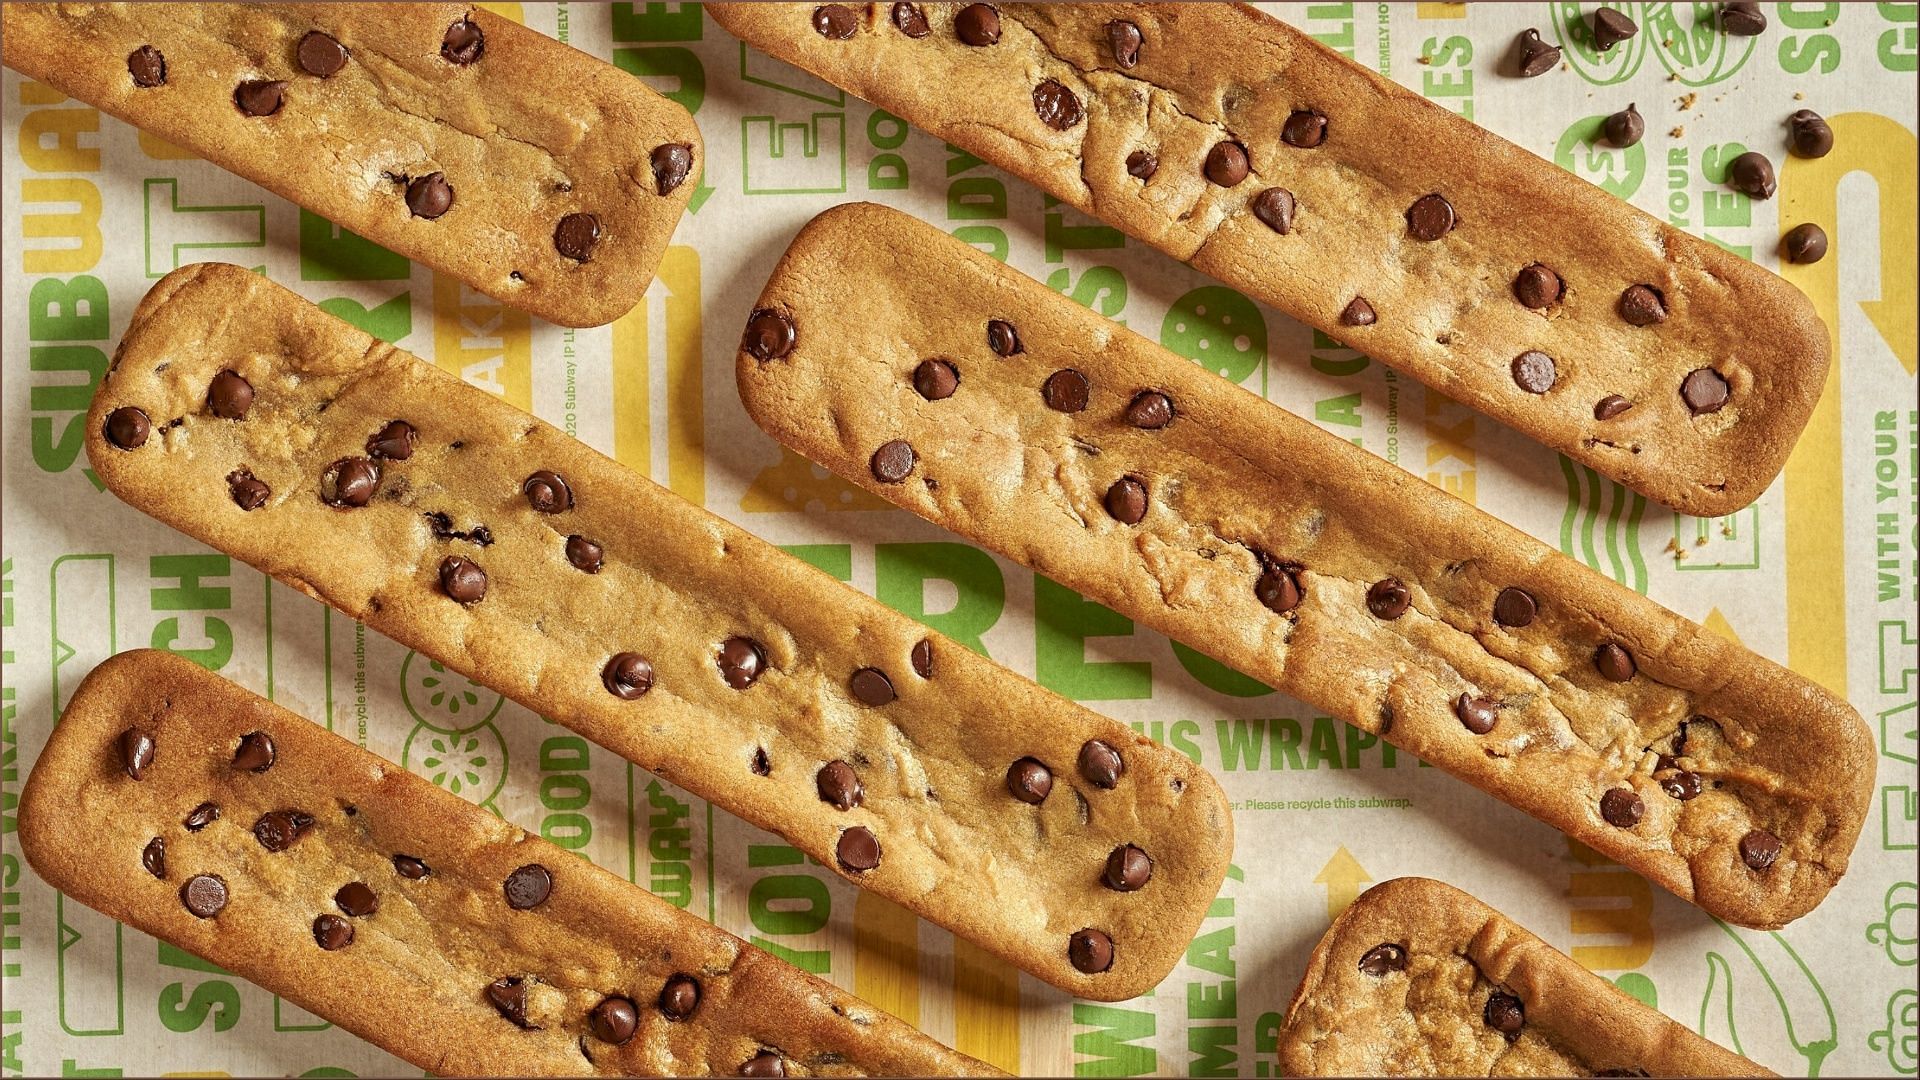 Subway plans to give free Footlong Chocolate Chip Cookies on National Cookie Day (Image via Subway)